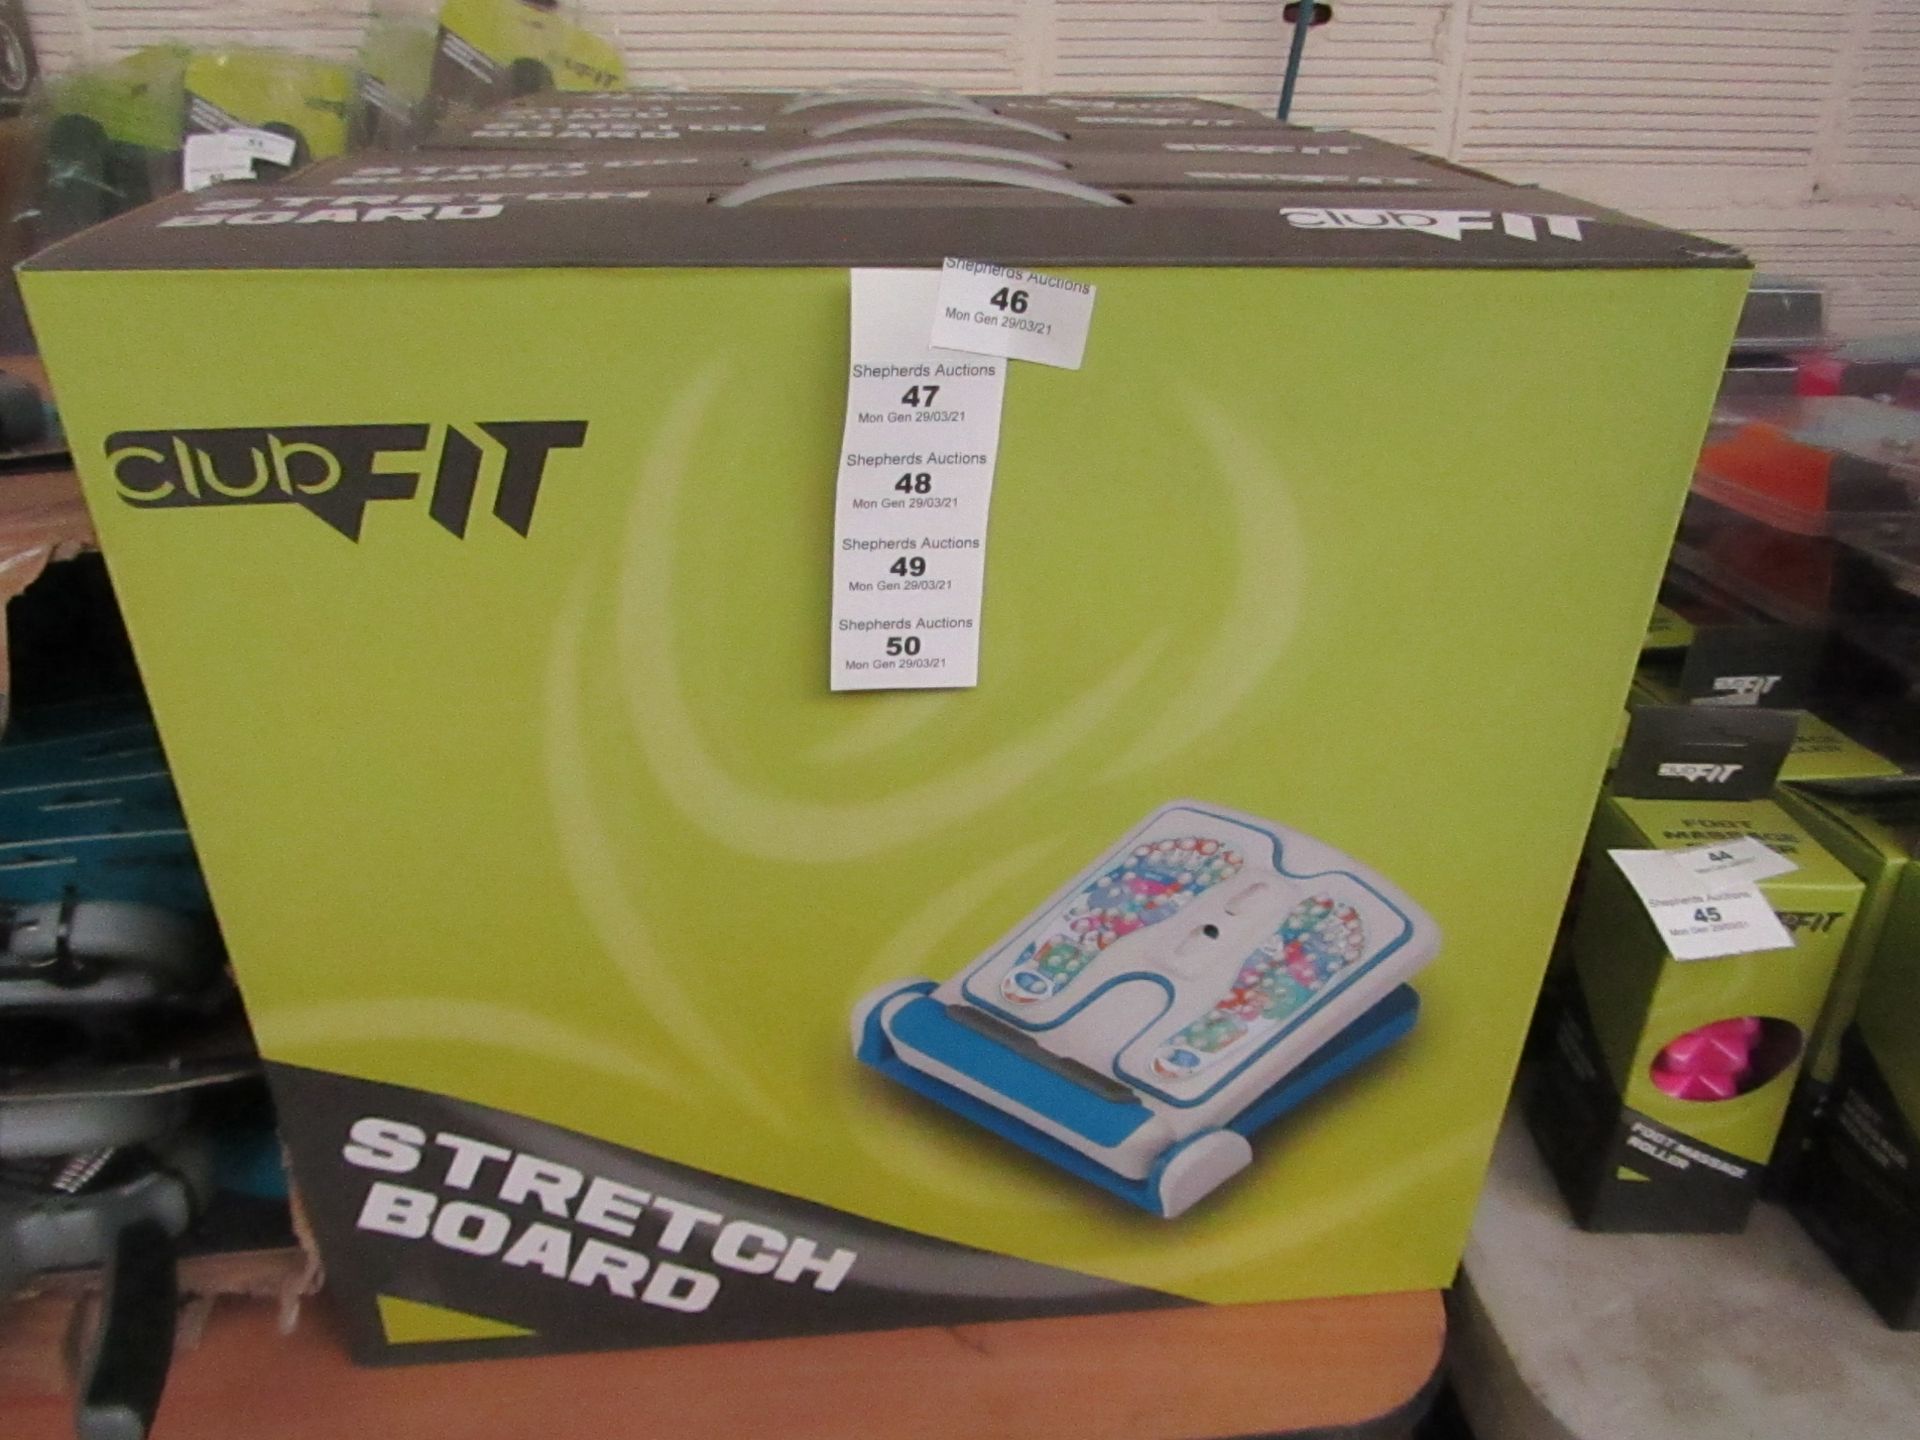 ClubFit - Stretch Board - Unchecked & Boxed - Looks to be New, However This merely own Opinion.